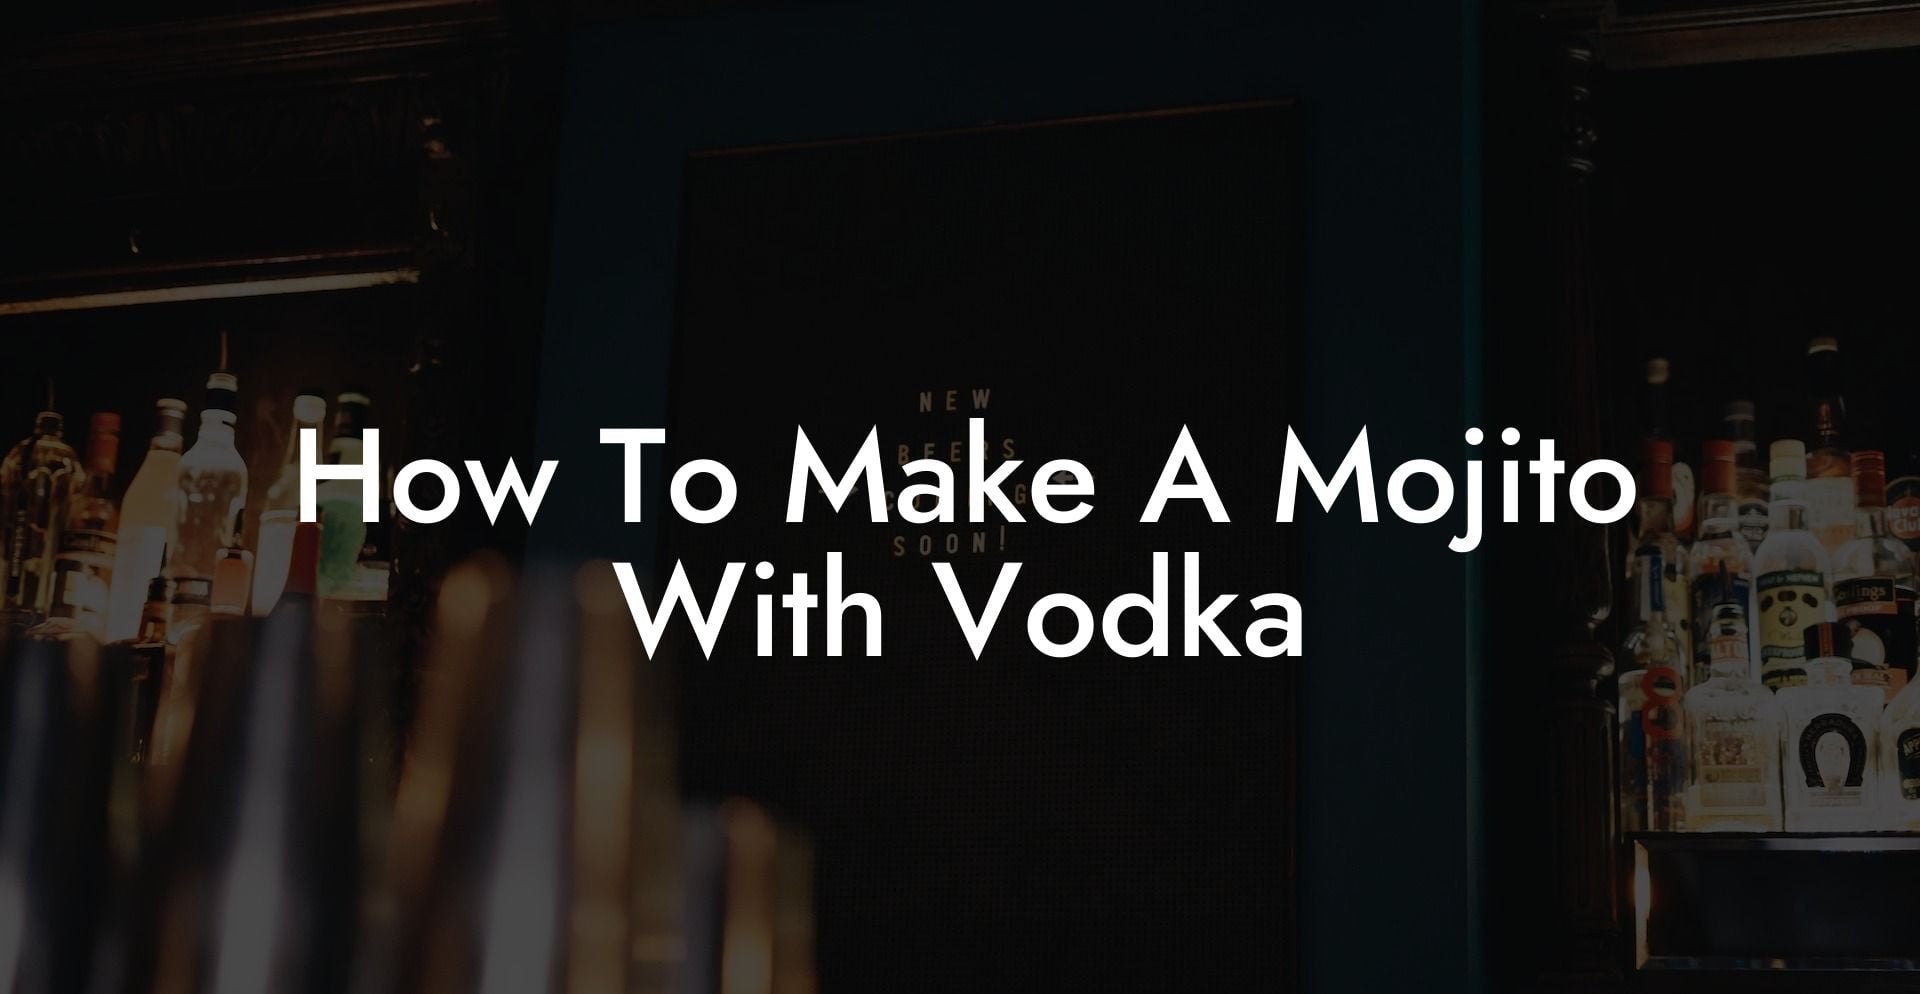 How To Make A Mojito With Vodka